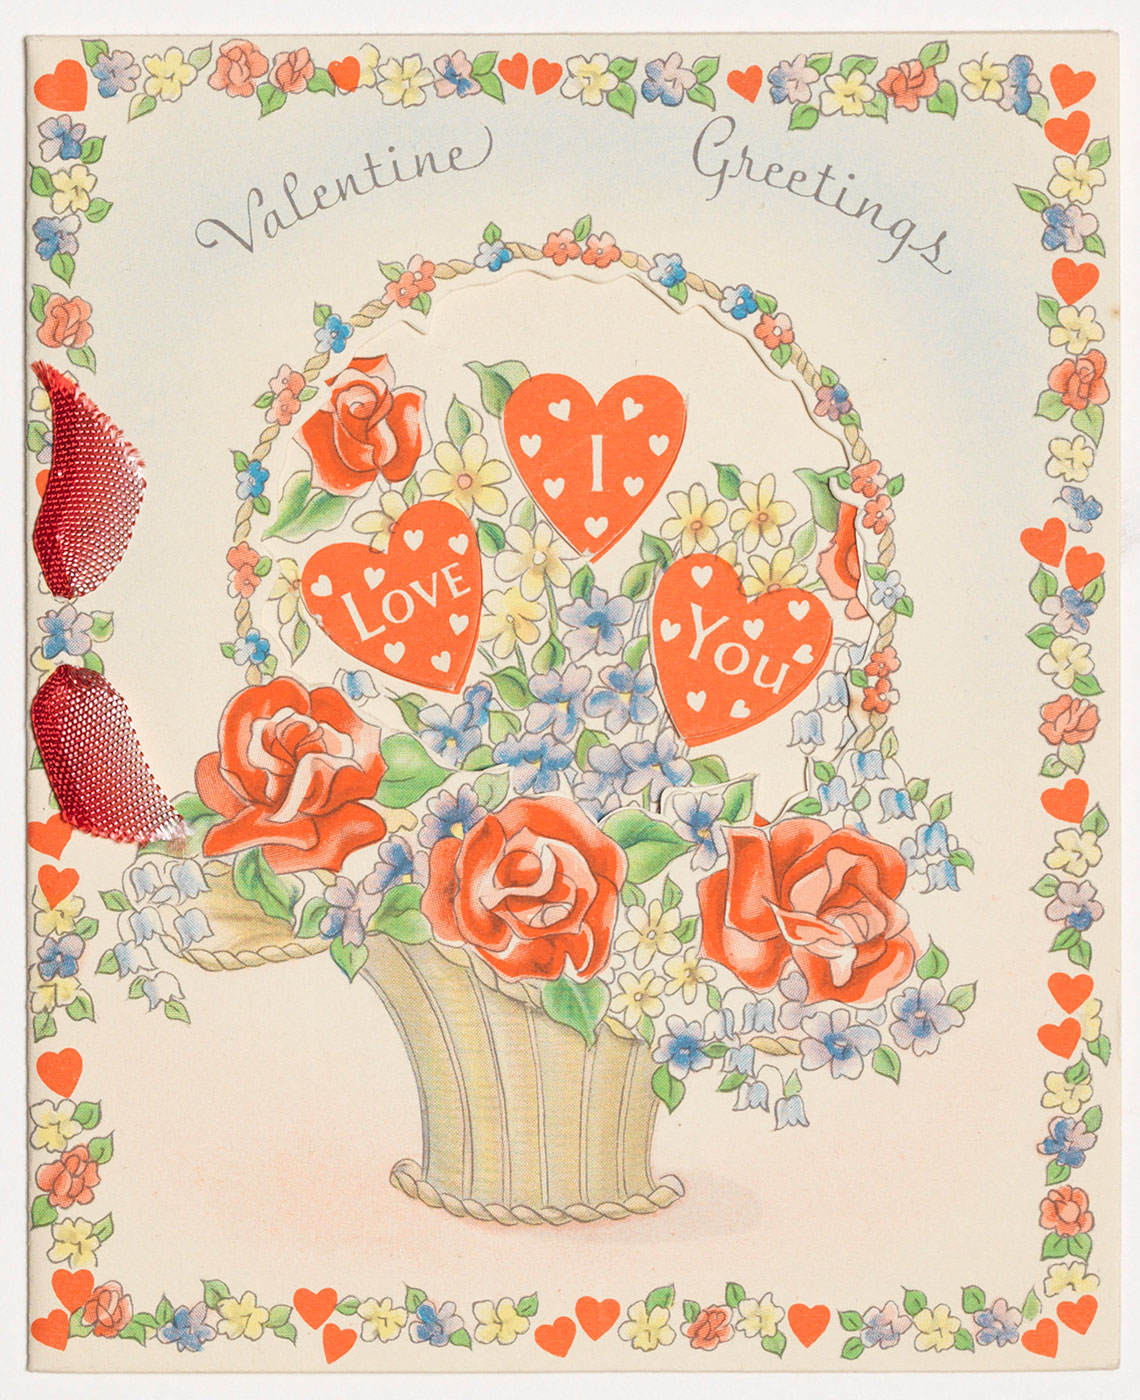 Cover of a Valentine's Day card, featuring a bouquet of hearts with "I love you" on it.